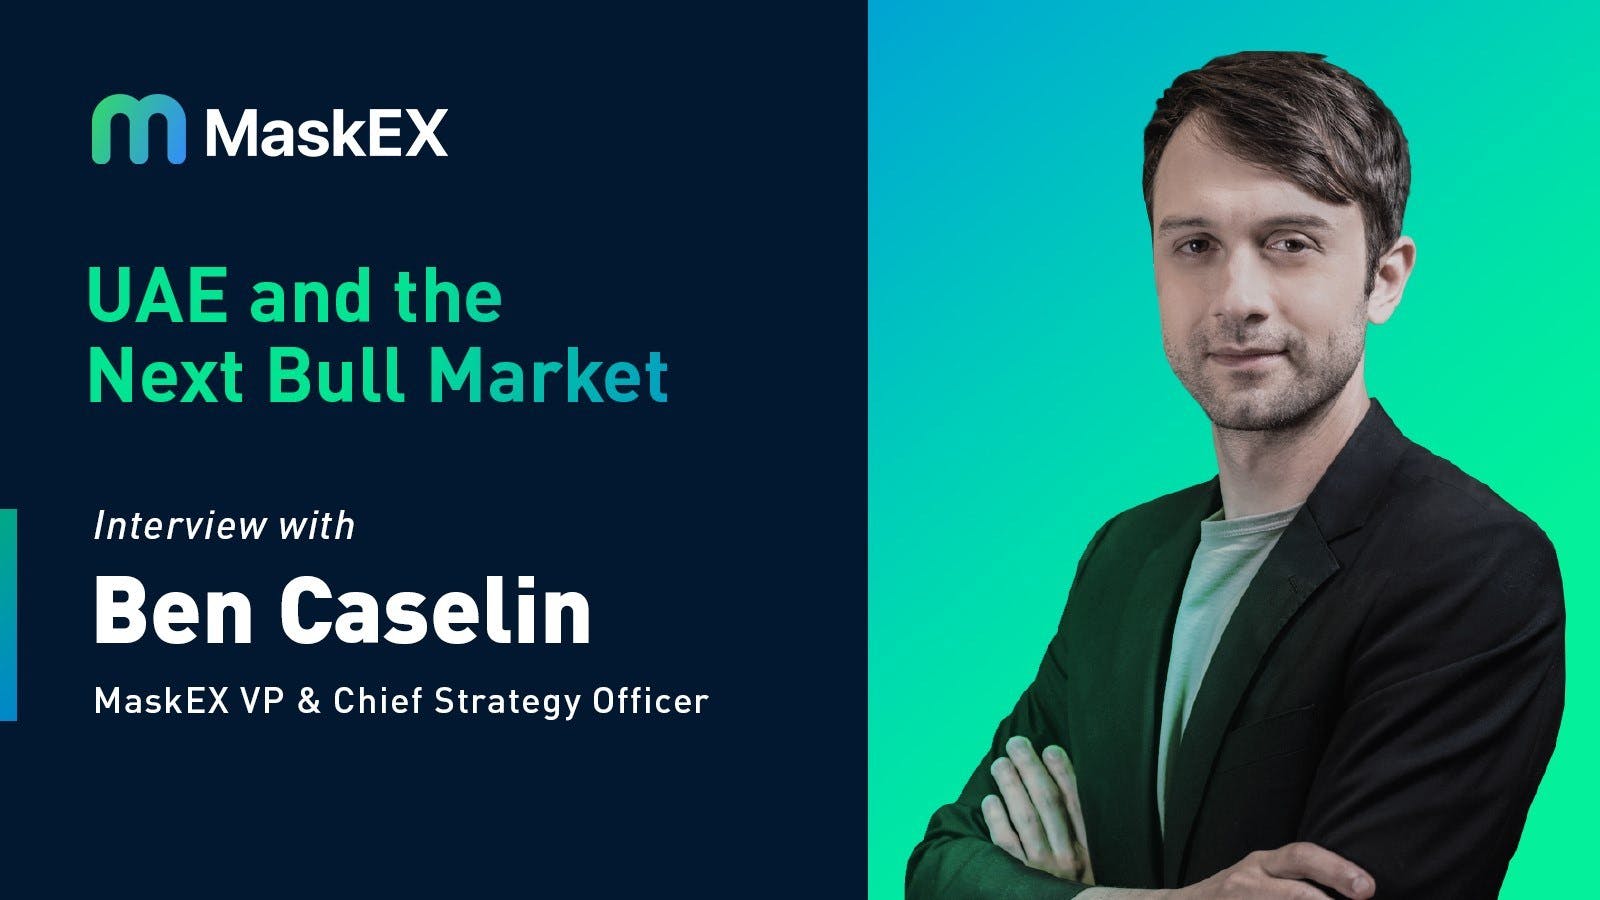 On Dubai, UAE and the Next Bull Market: Interview with MaskEX VP & Chief Strategy Officer